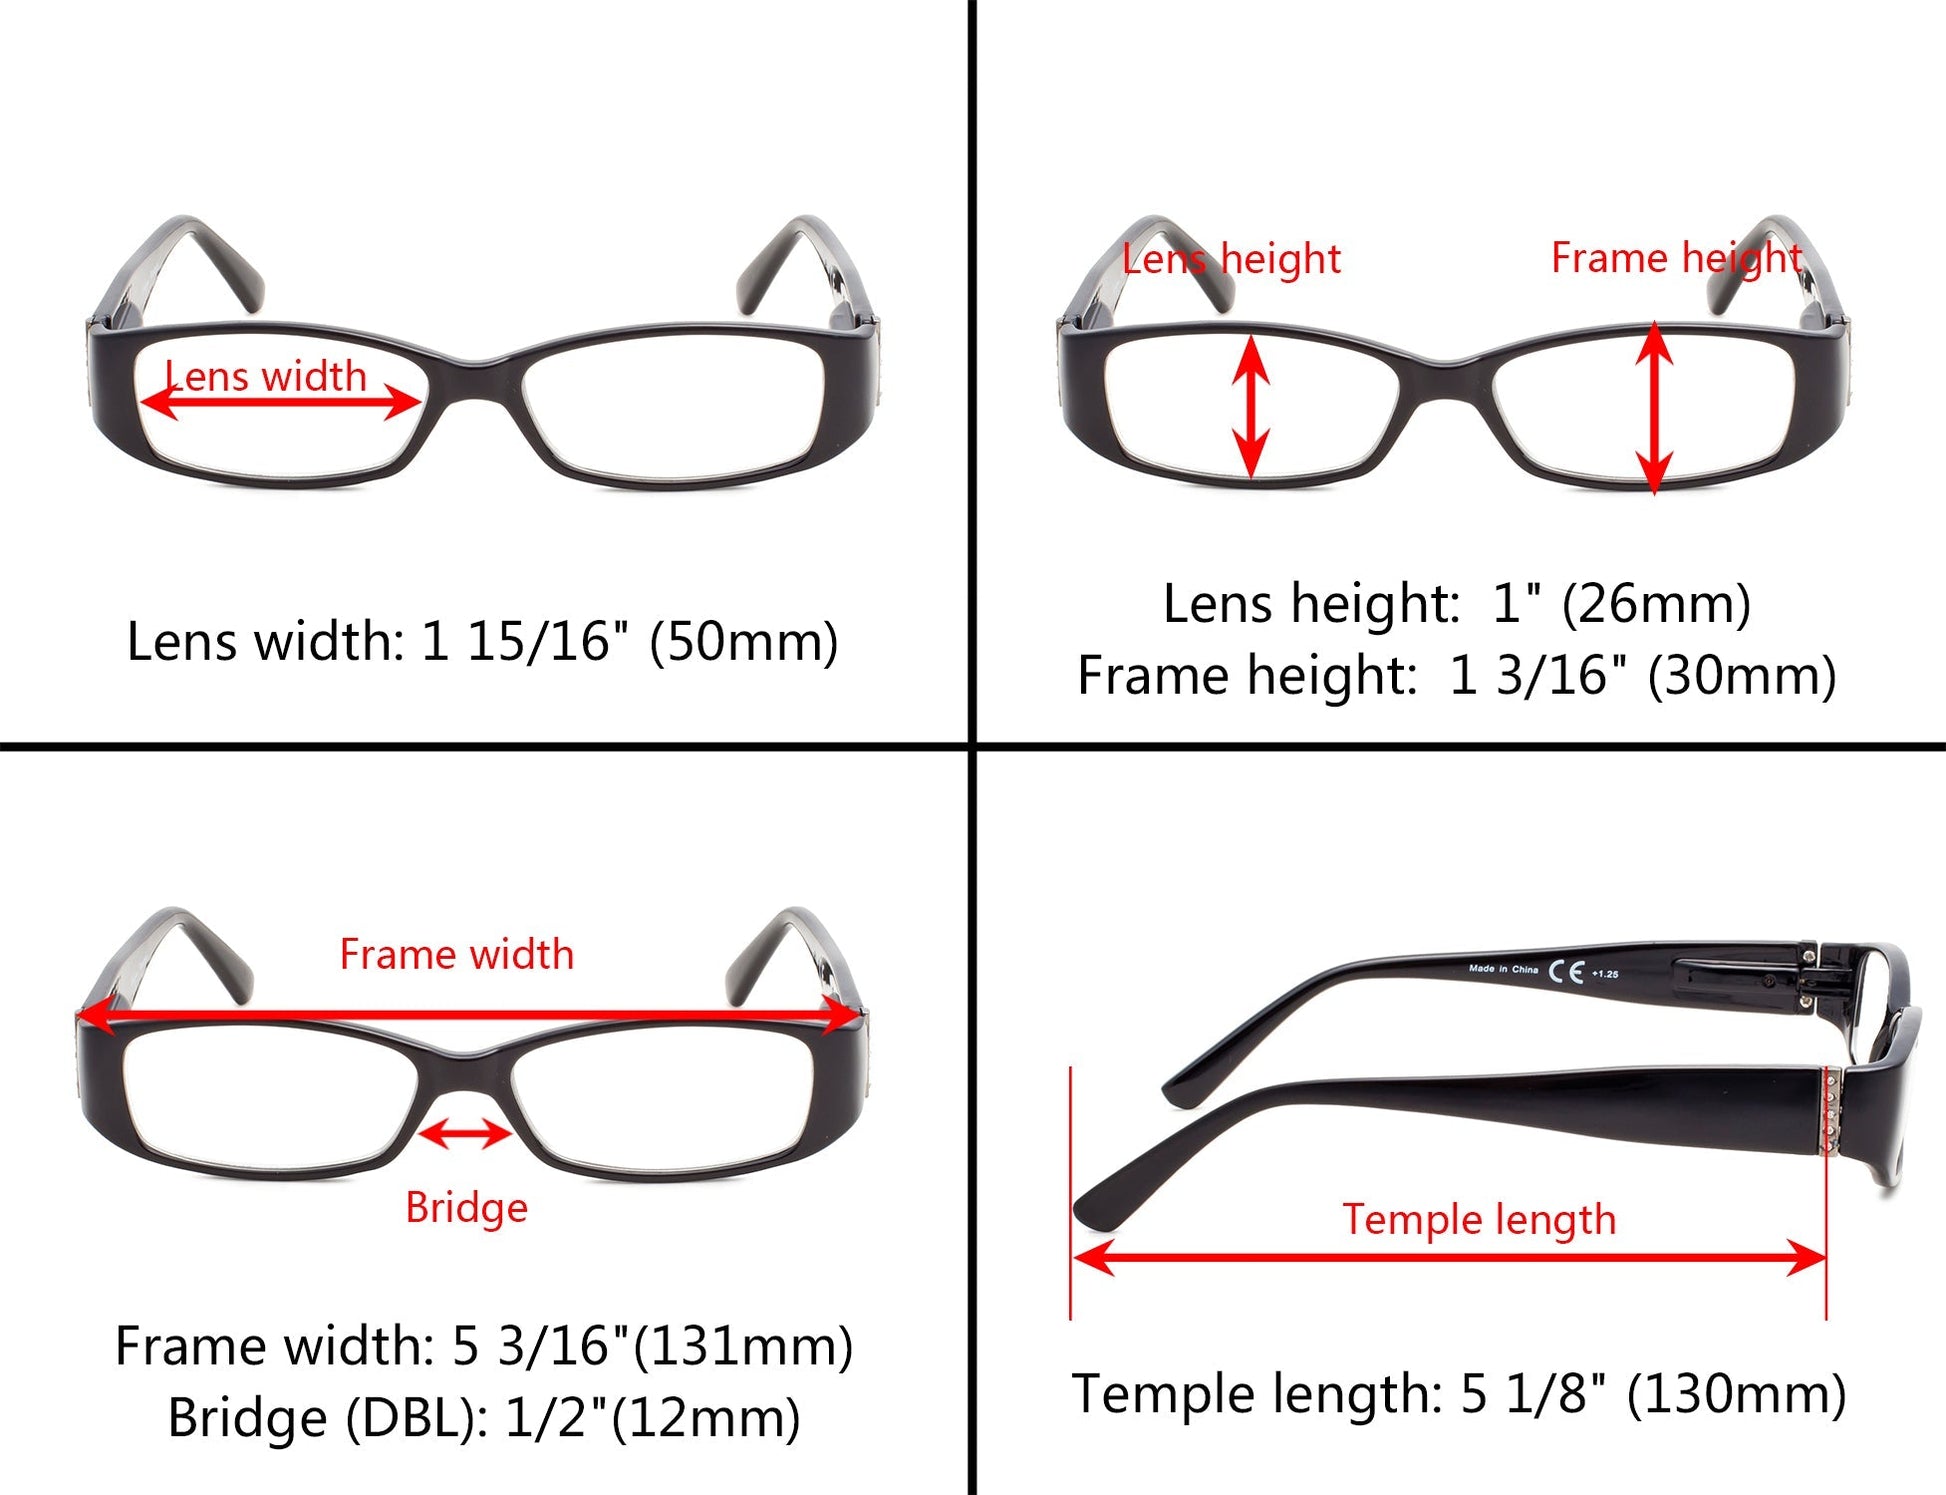 5 Pack Rectangle Crystals Reading Glasses for Women R081